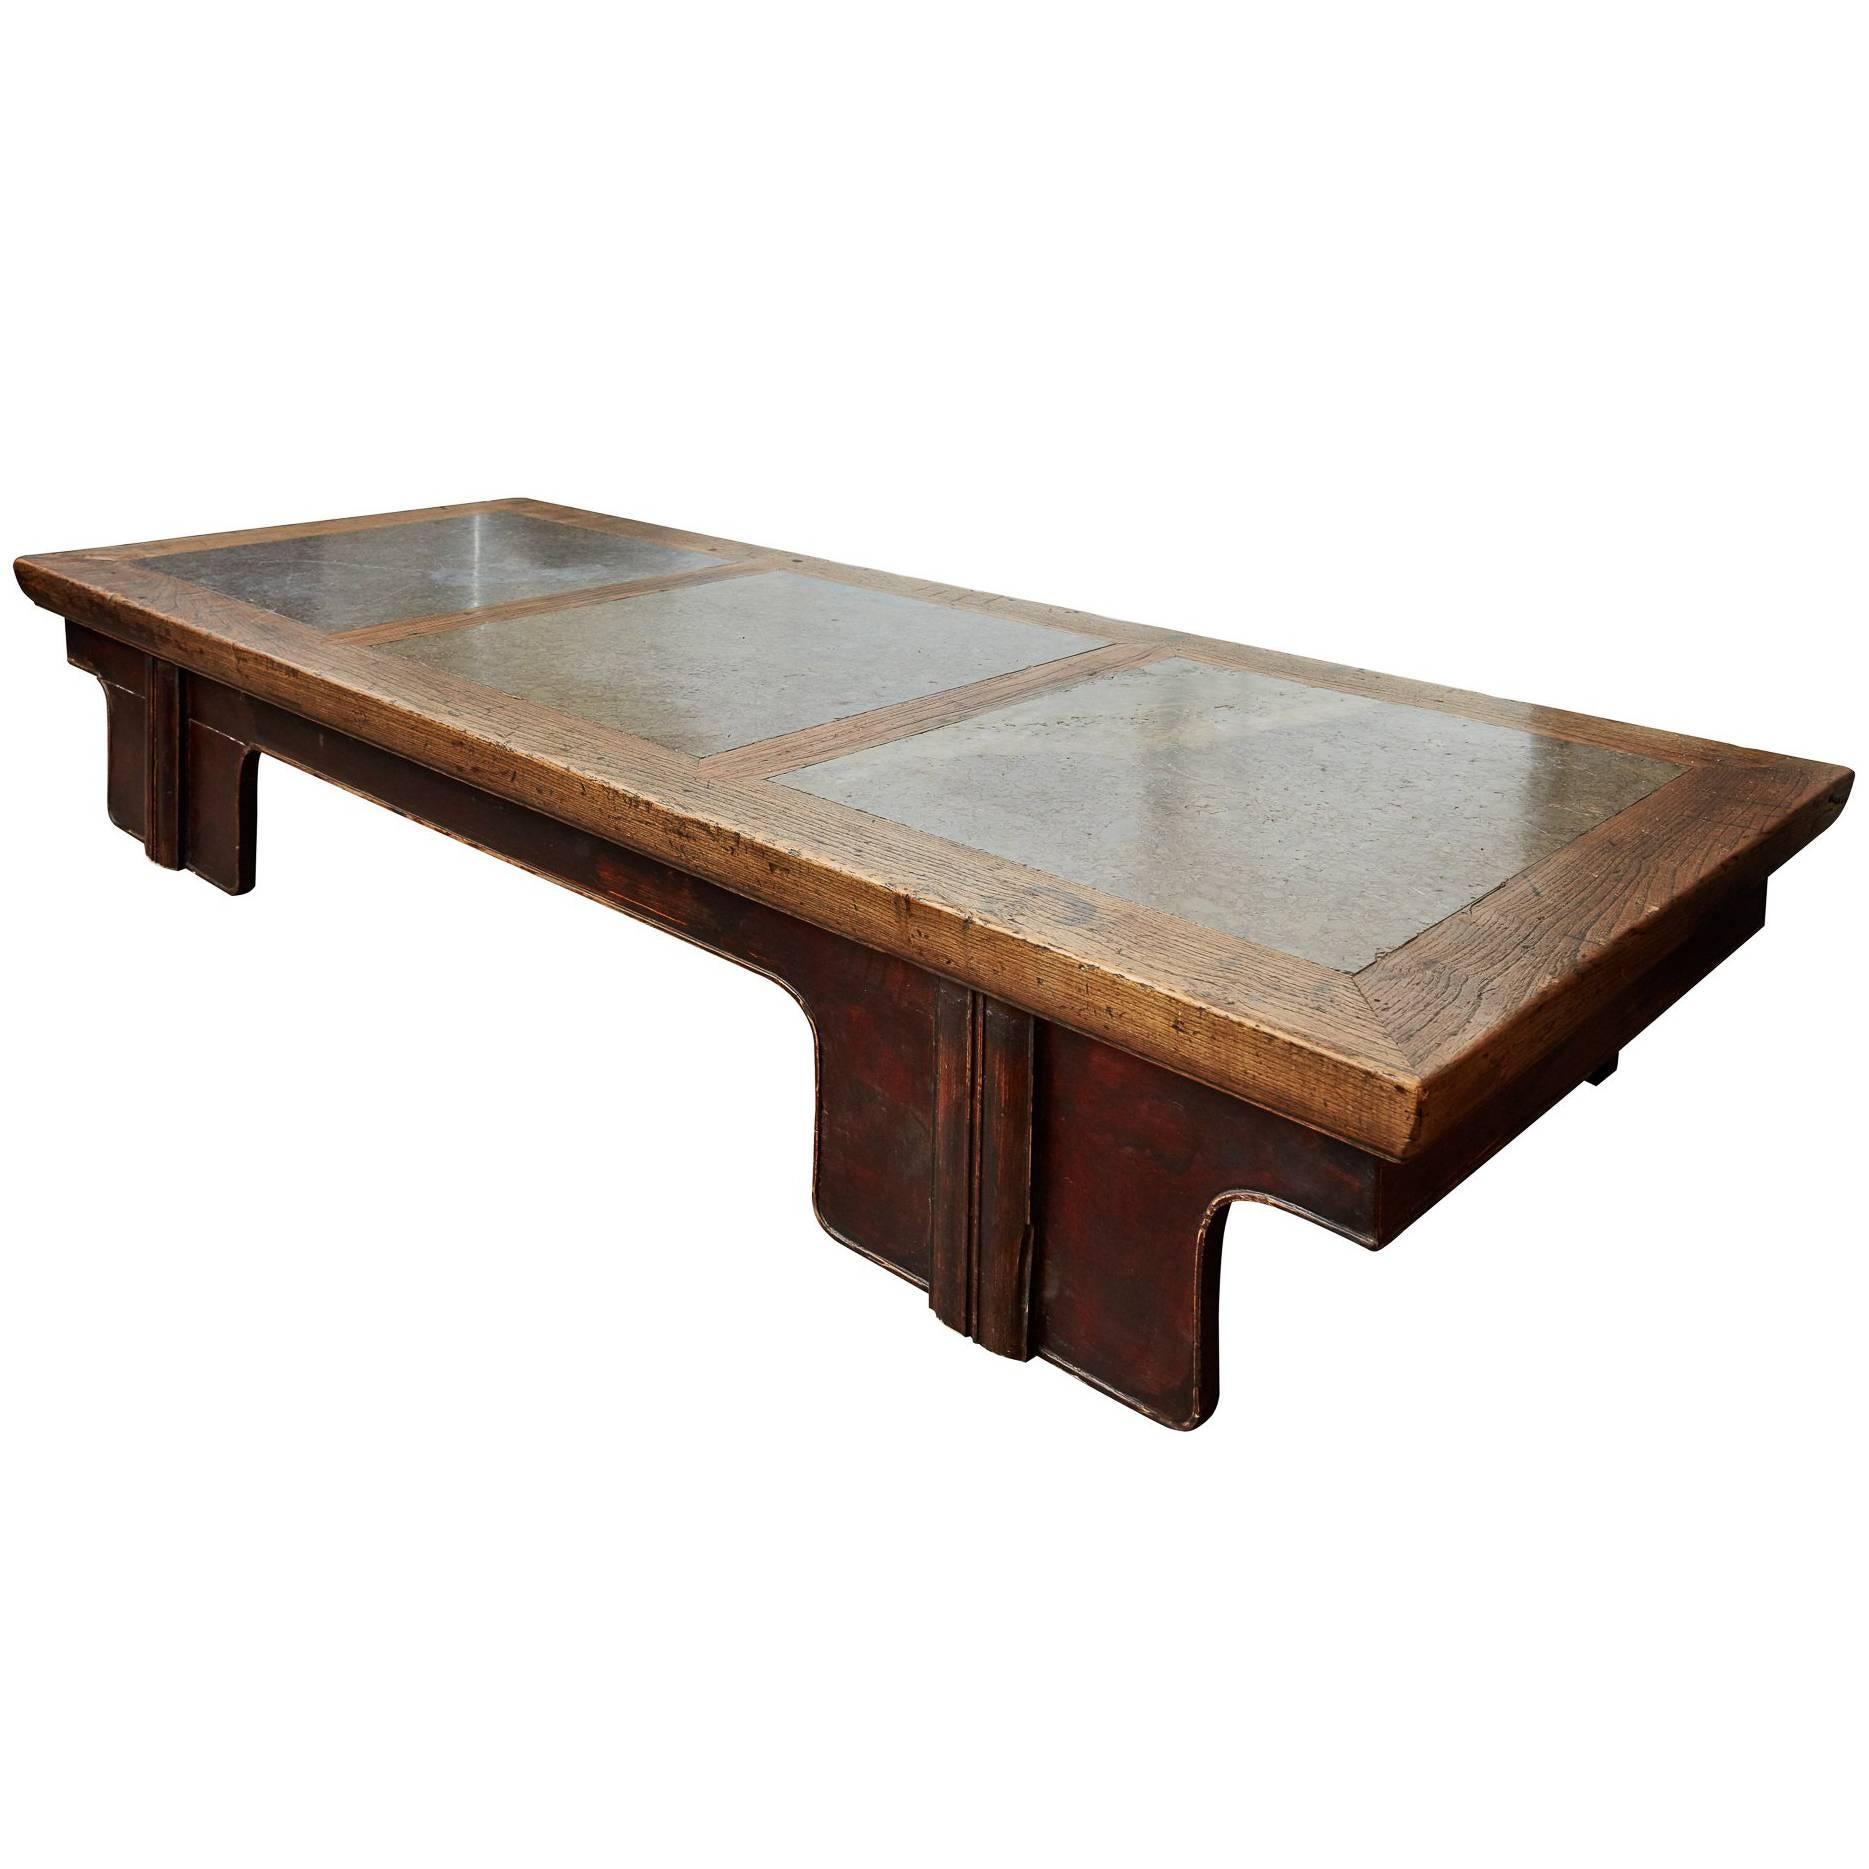 18th Century Chinese Puddle Stone Low Calligraphy Table